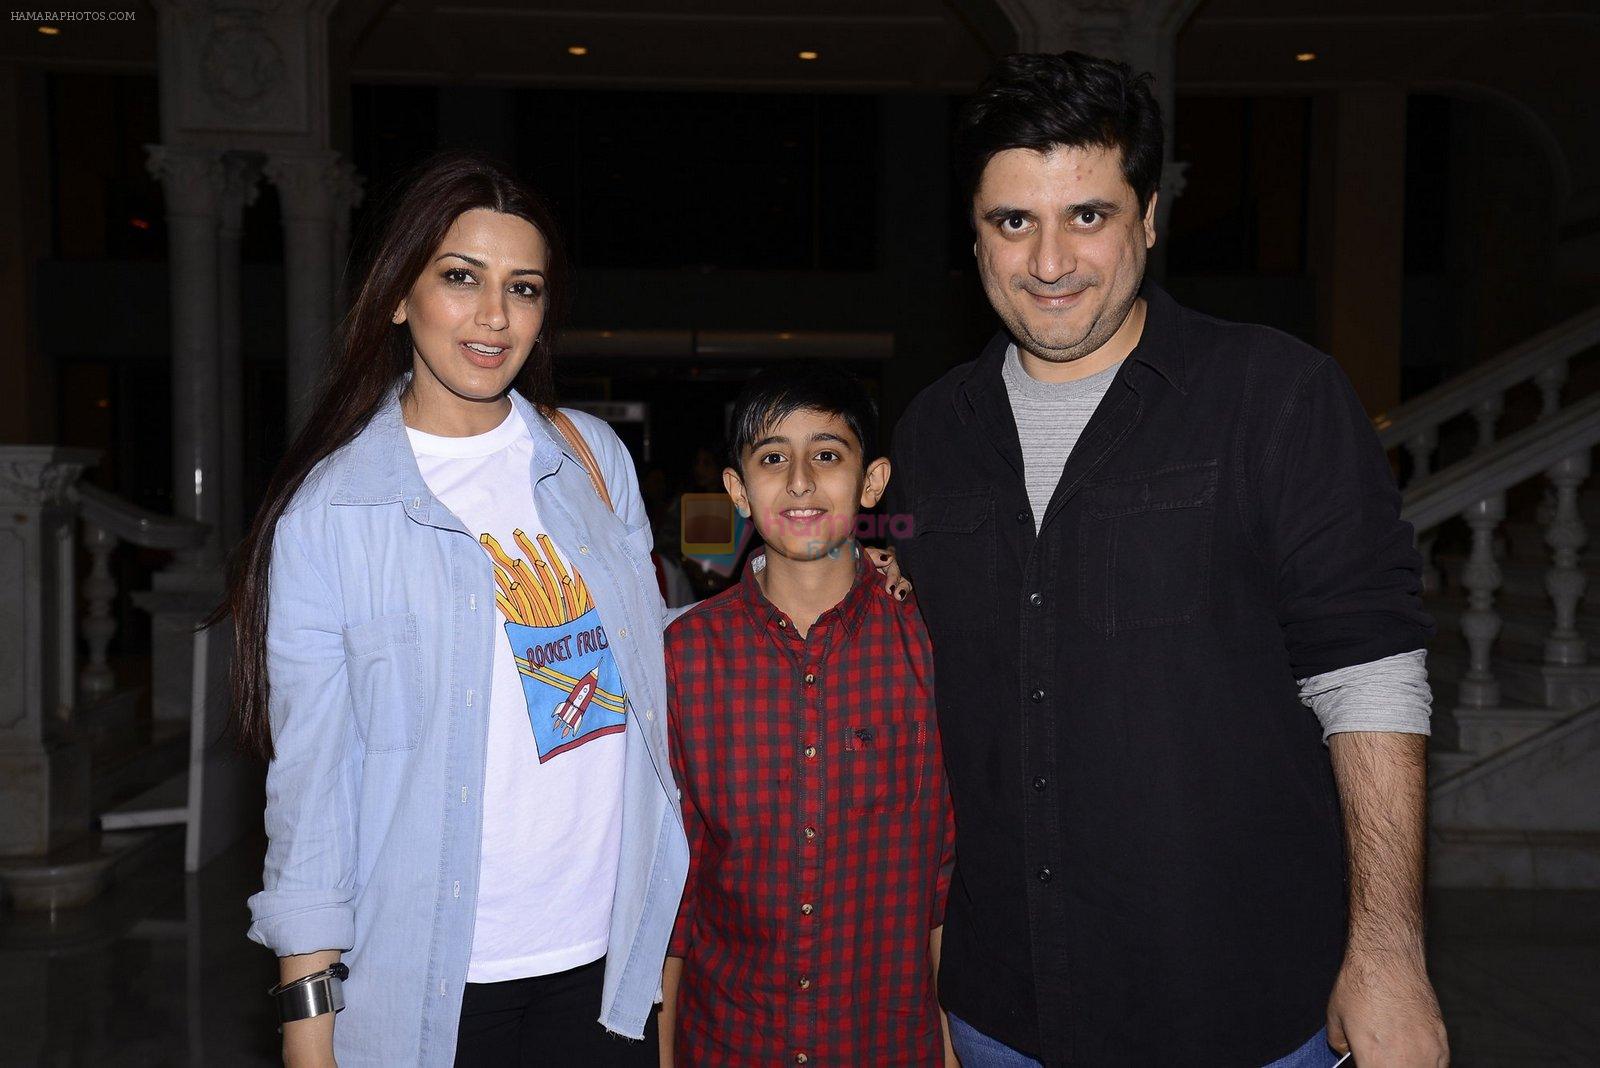 Sonali Bendre came to watch Stomp on 17th Dec 2016